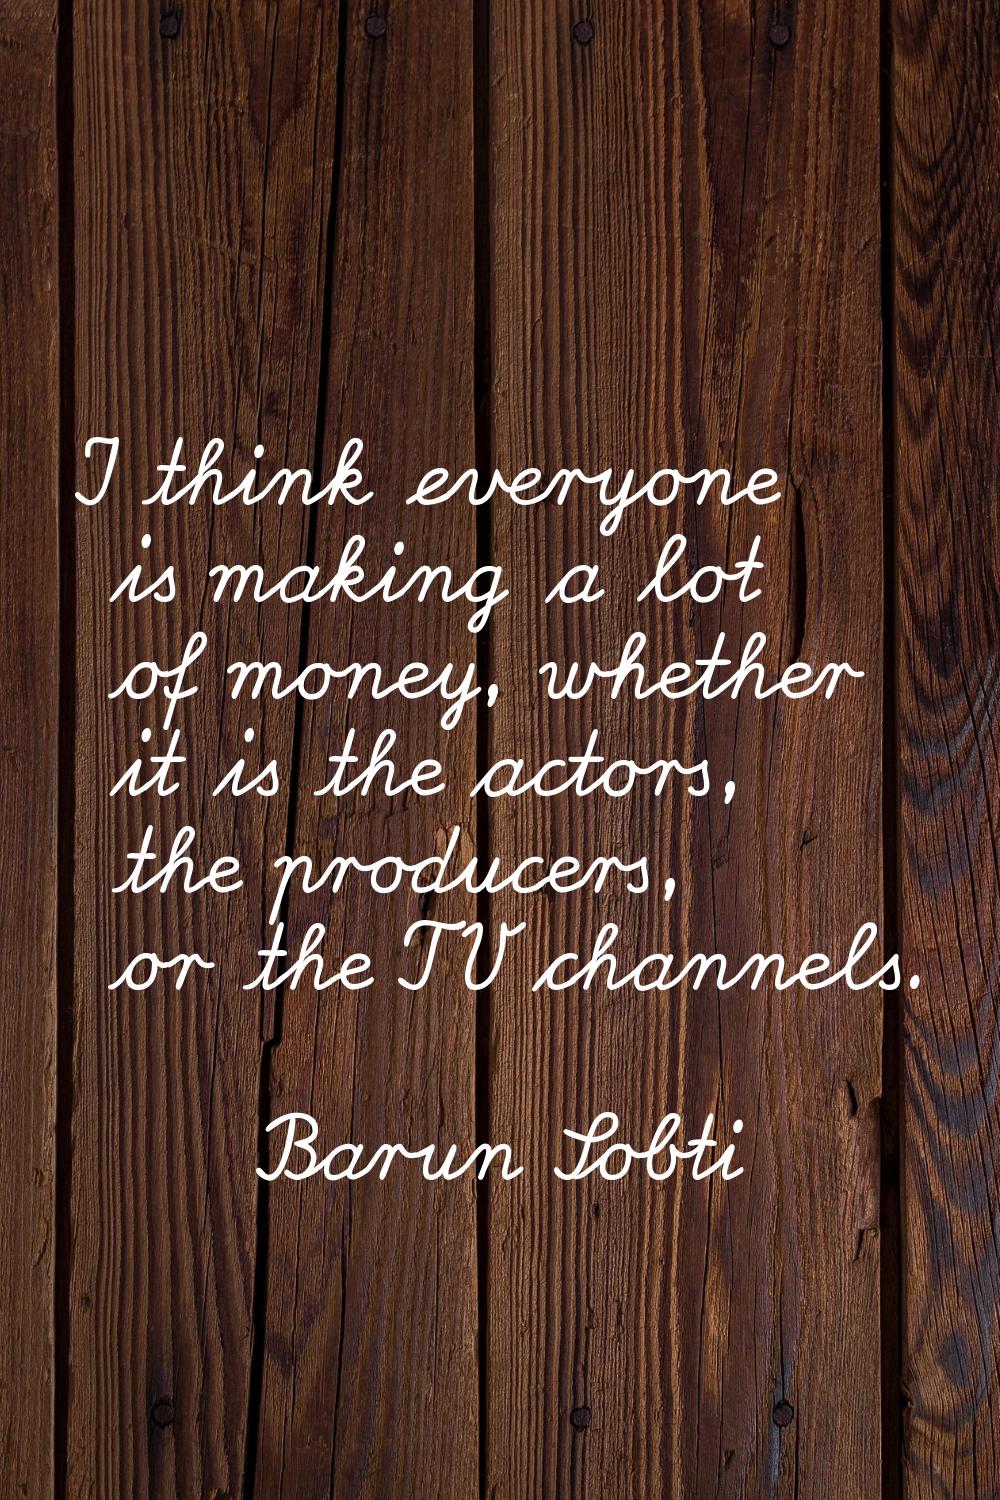 I think everyone is making a lot of money, whether it is the actors, the producers, or the TV chann